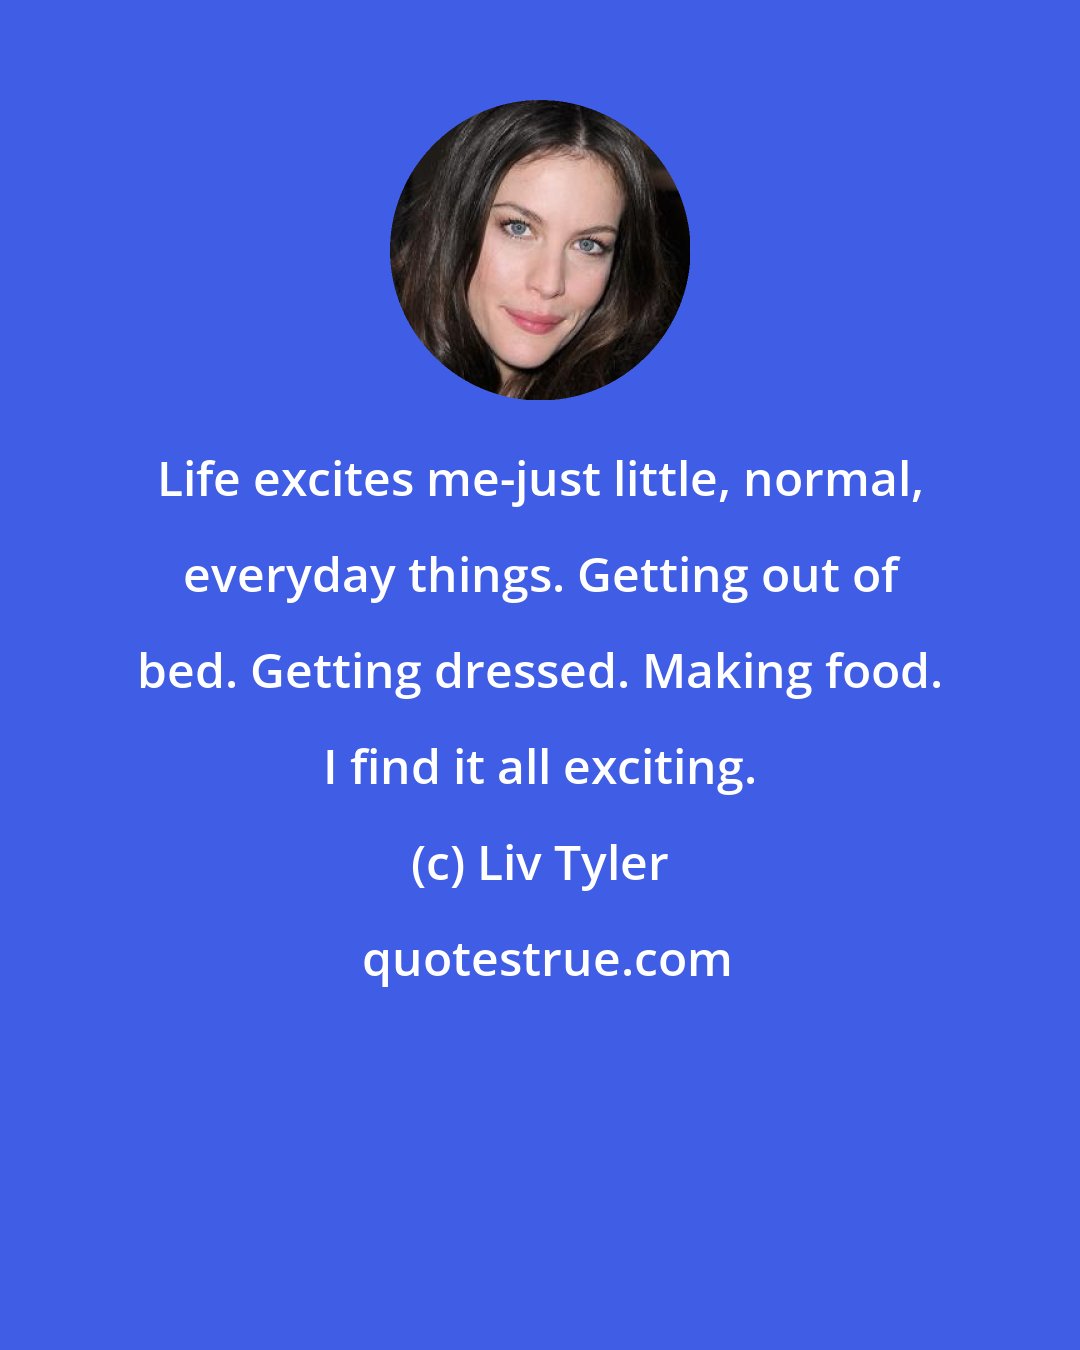 Liv Tyler: Life excites me-just little, normal, everyday things. Getting out of bed. Getting dressed. Making food. I find it all exciting.